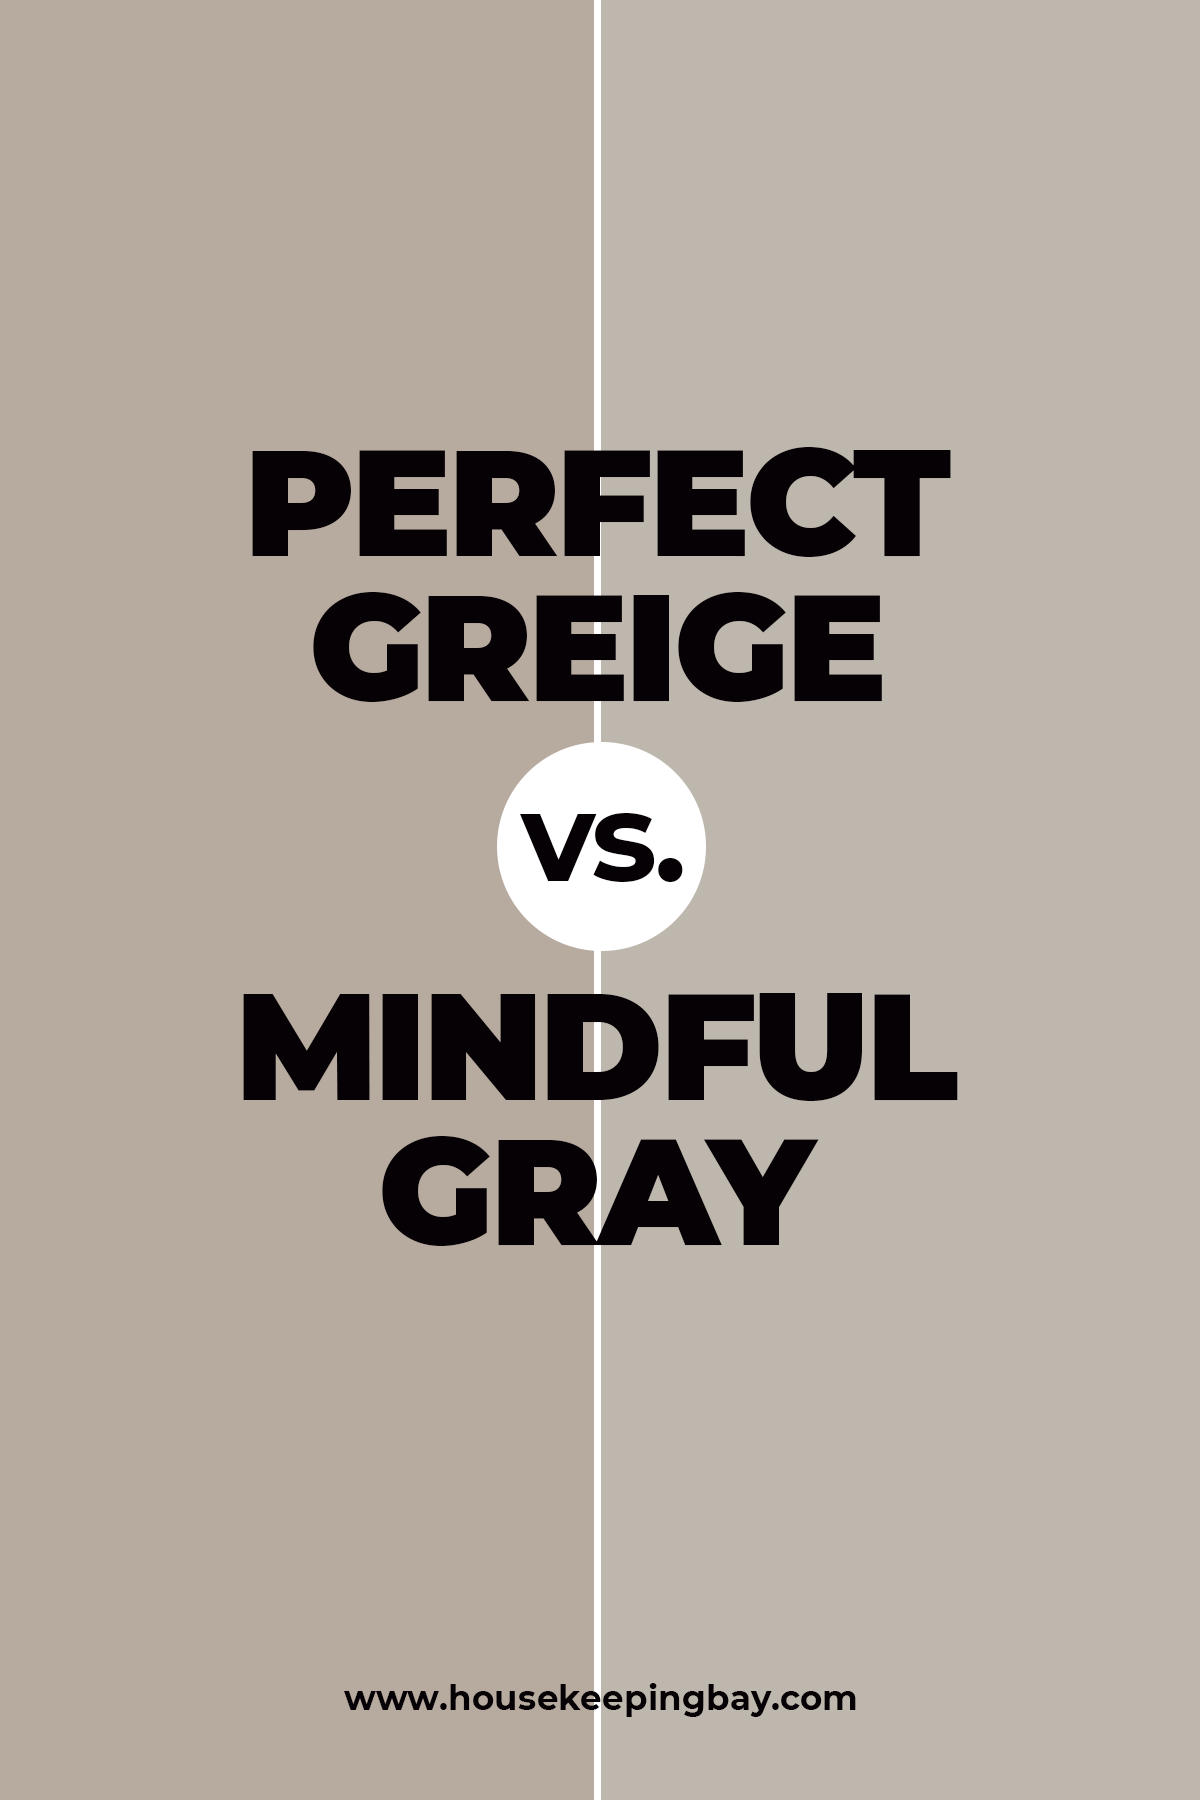 Perfect Greige vs. Mindful Gray